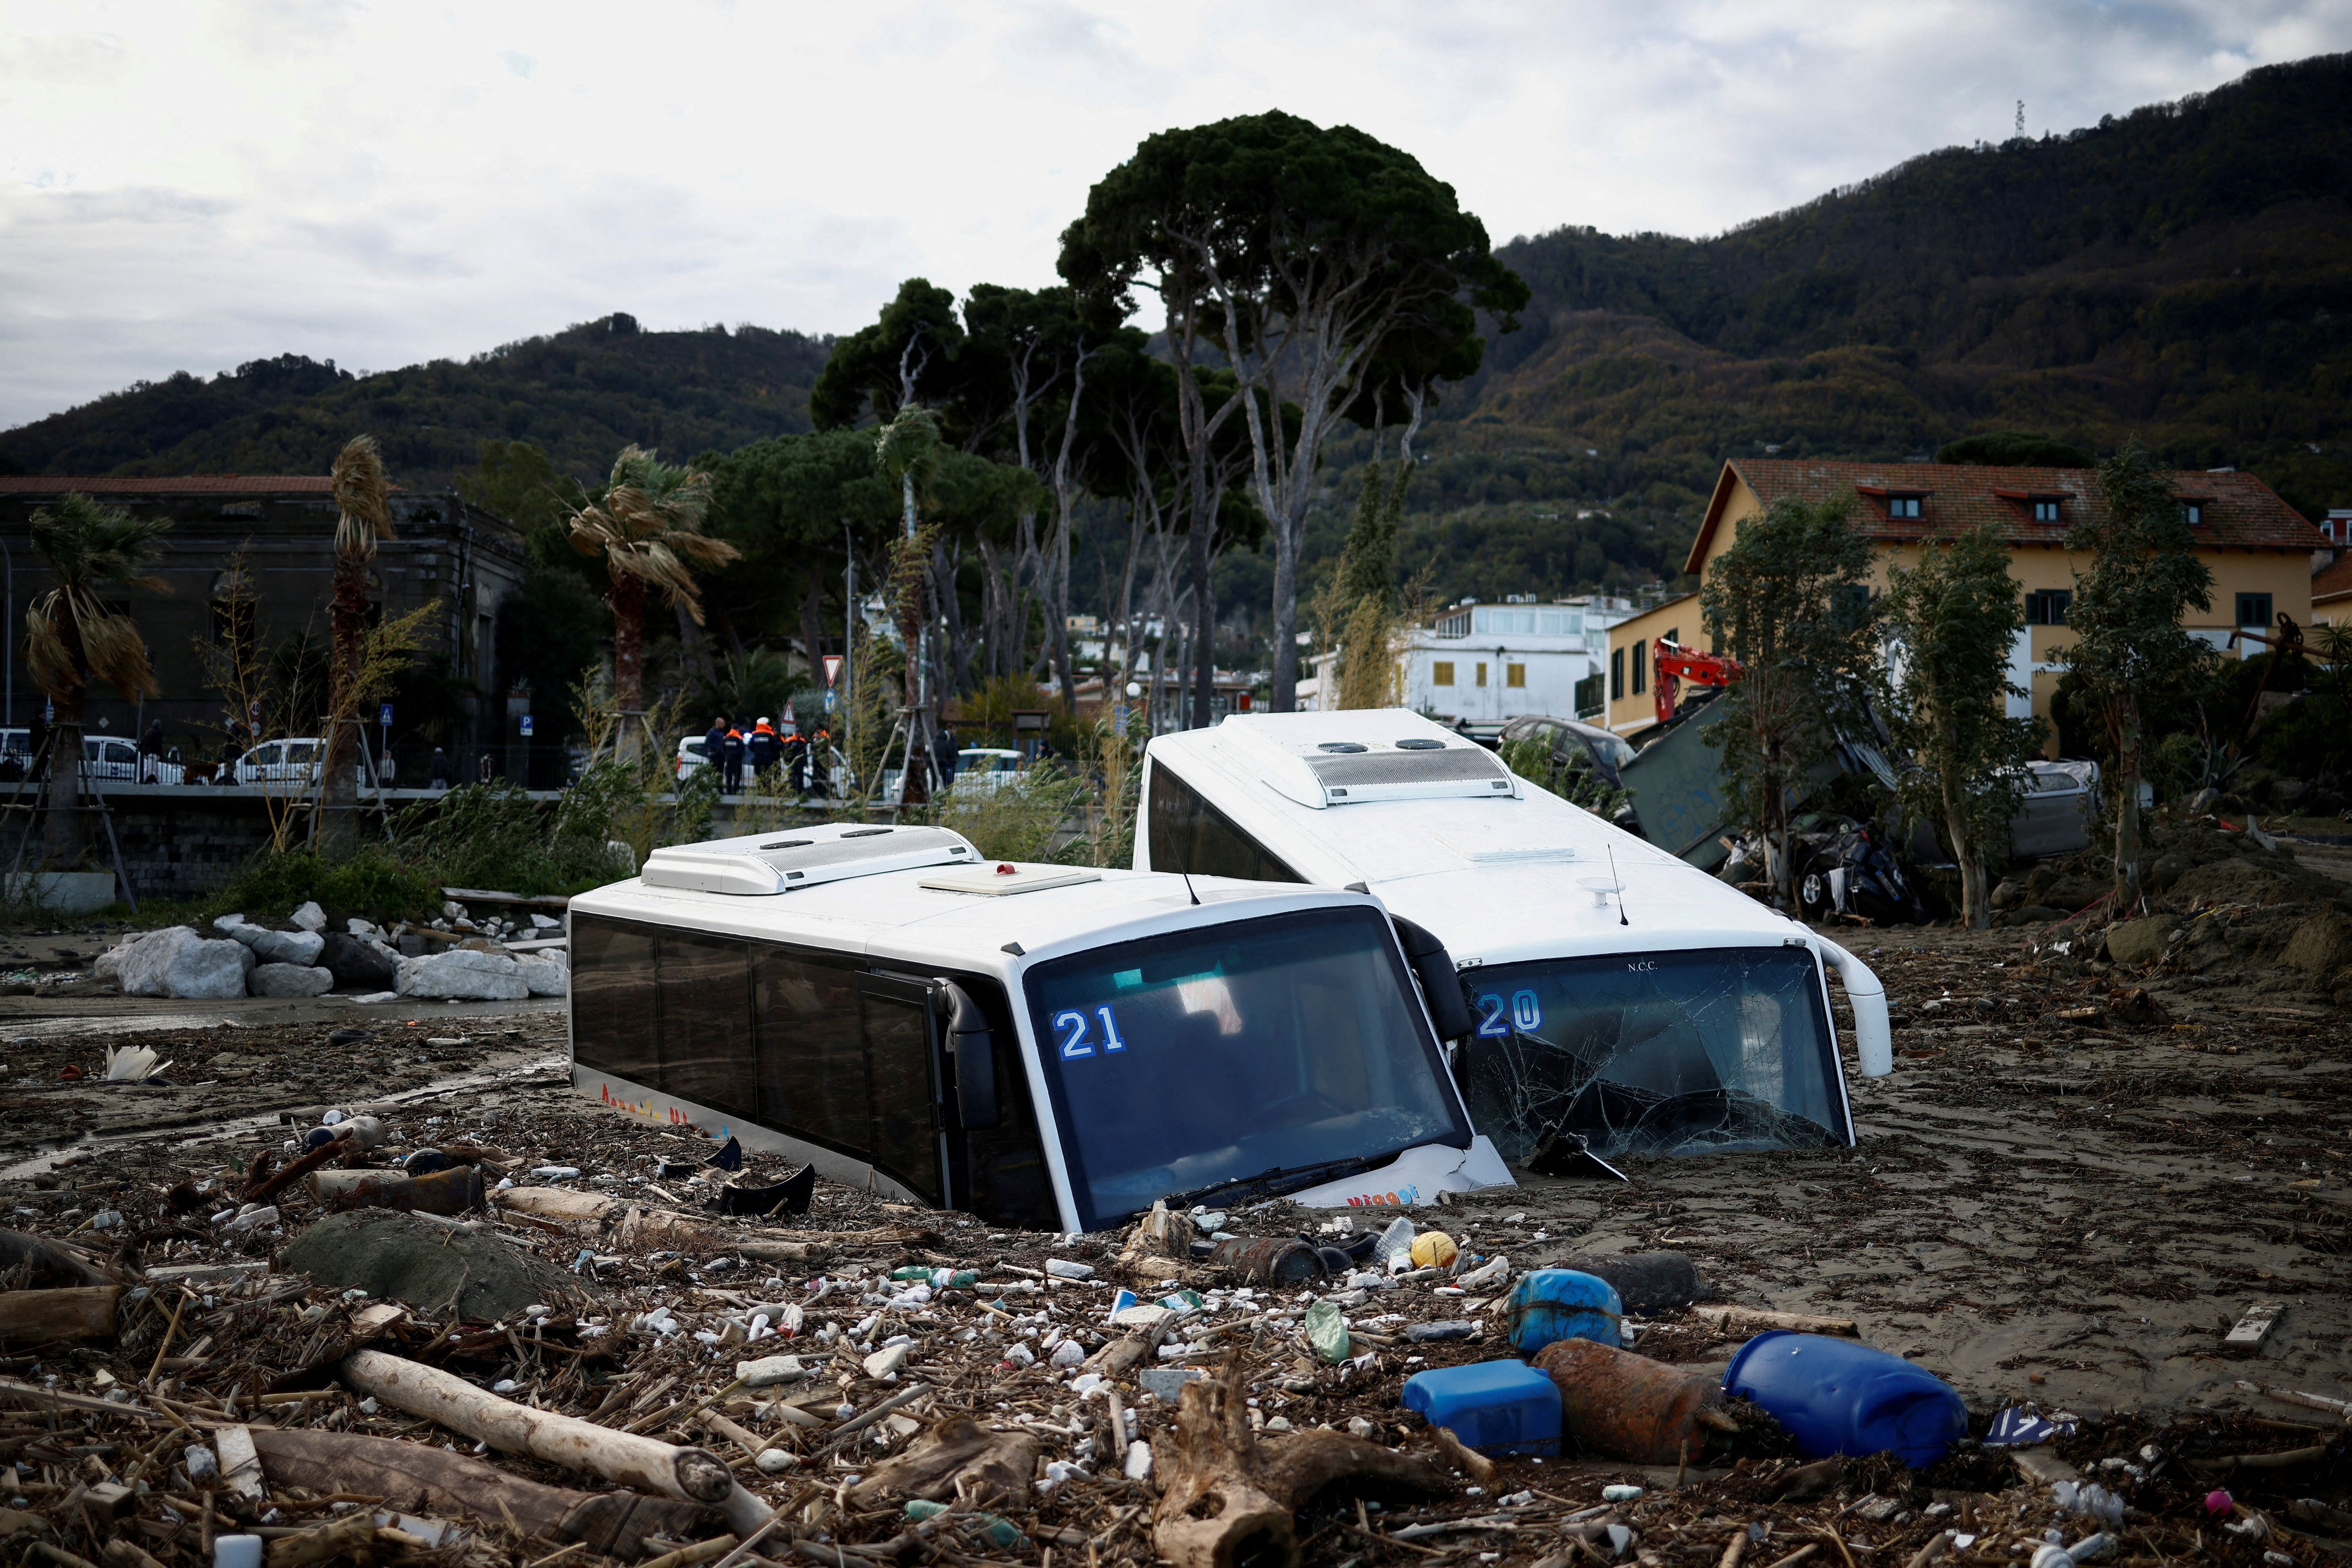 Damaged buses lie among the rubble after a landslide on the Italian holiday island of Ischia, Italy.